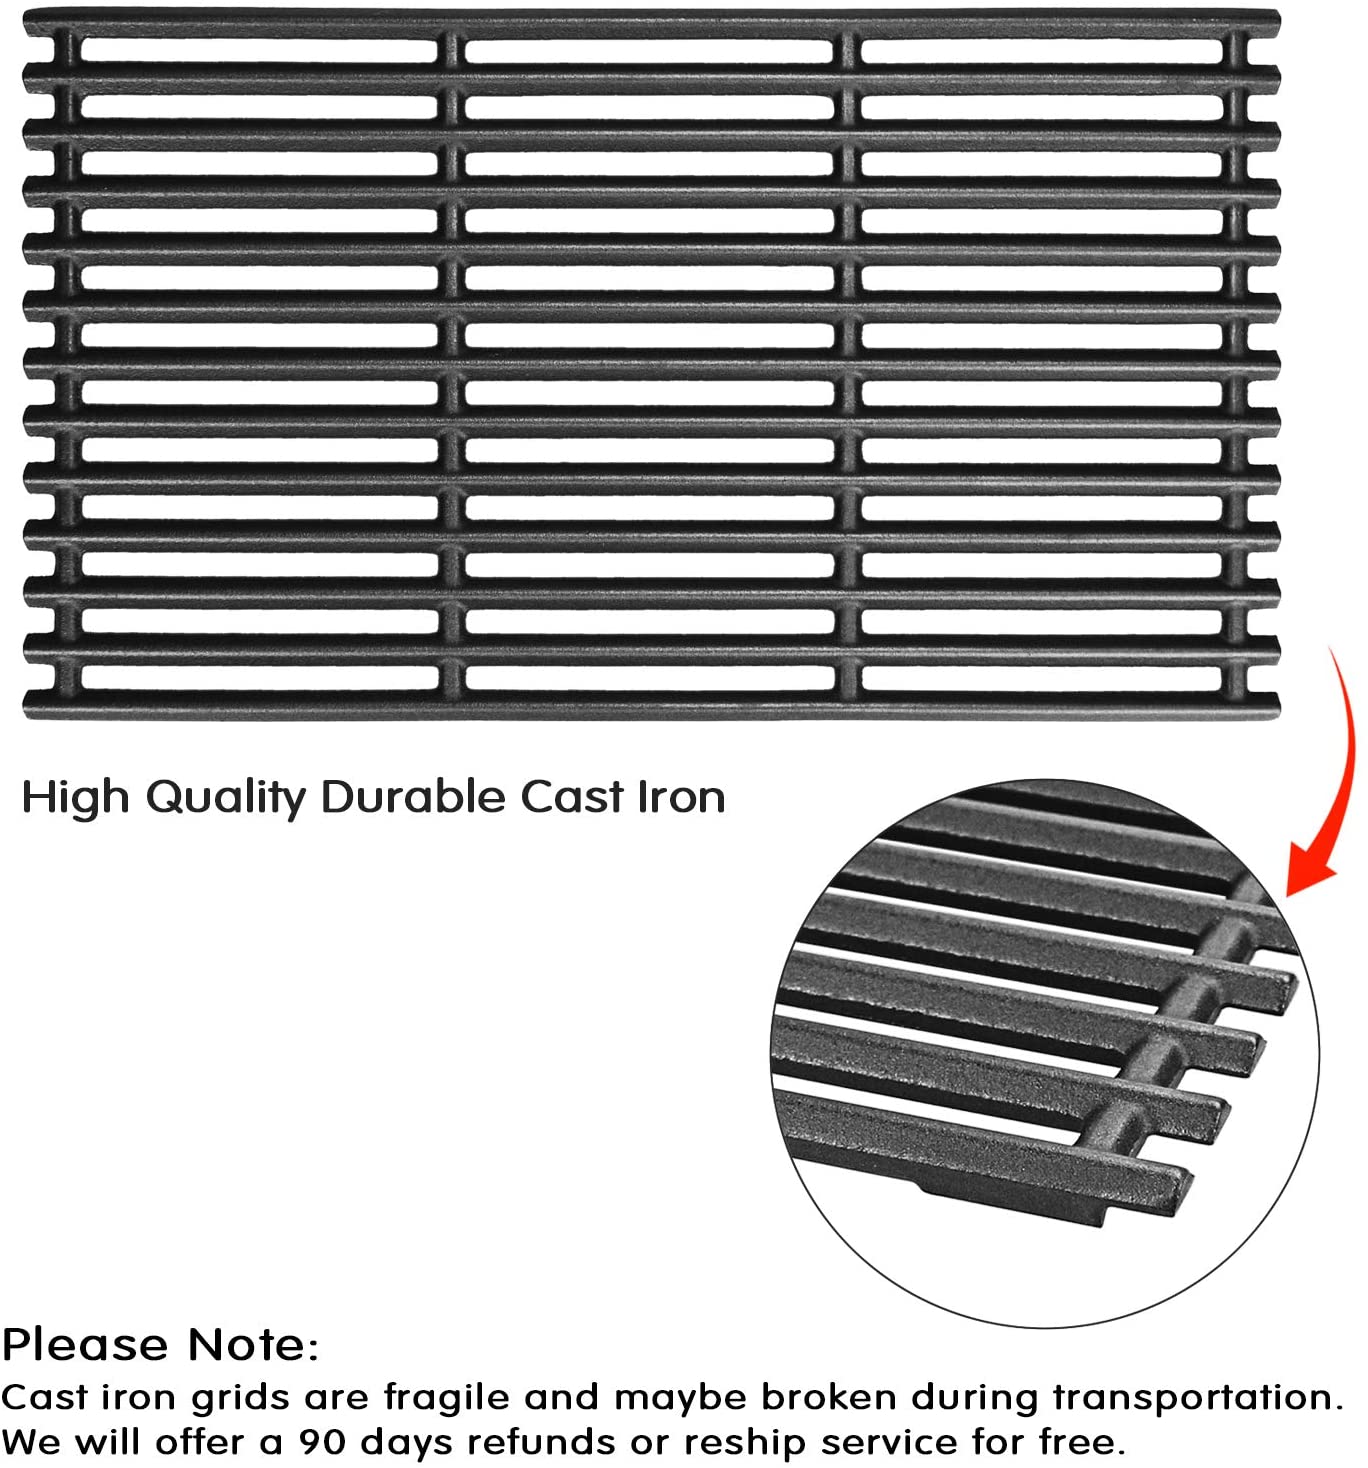 Hisencn Cast Iron Cooking Grates for Charbroil Performance 463448021  463449021 463466522 463455021 5-Burner Grill, for Charbroil 463436215  463433016 463432215 4Burner Gas Grill, 3Pack Grill Grates